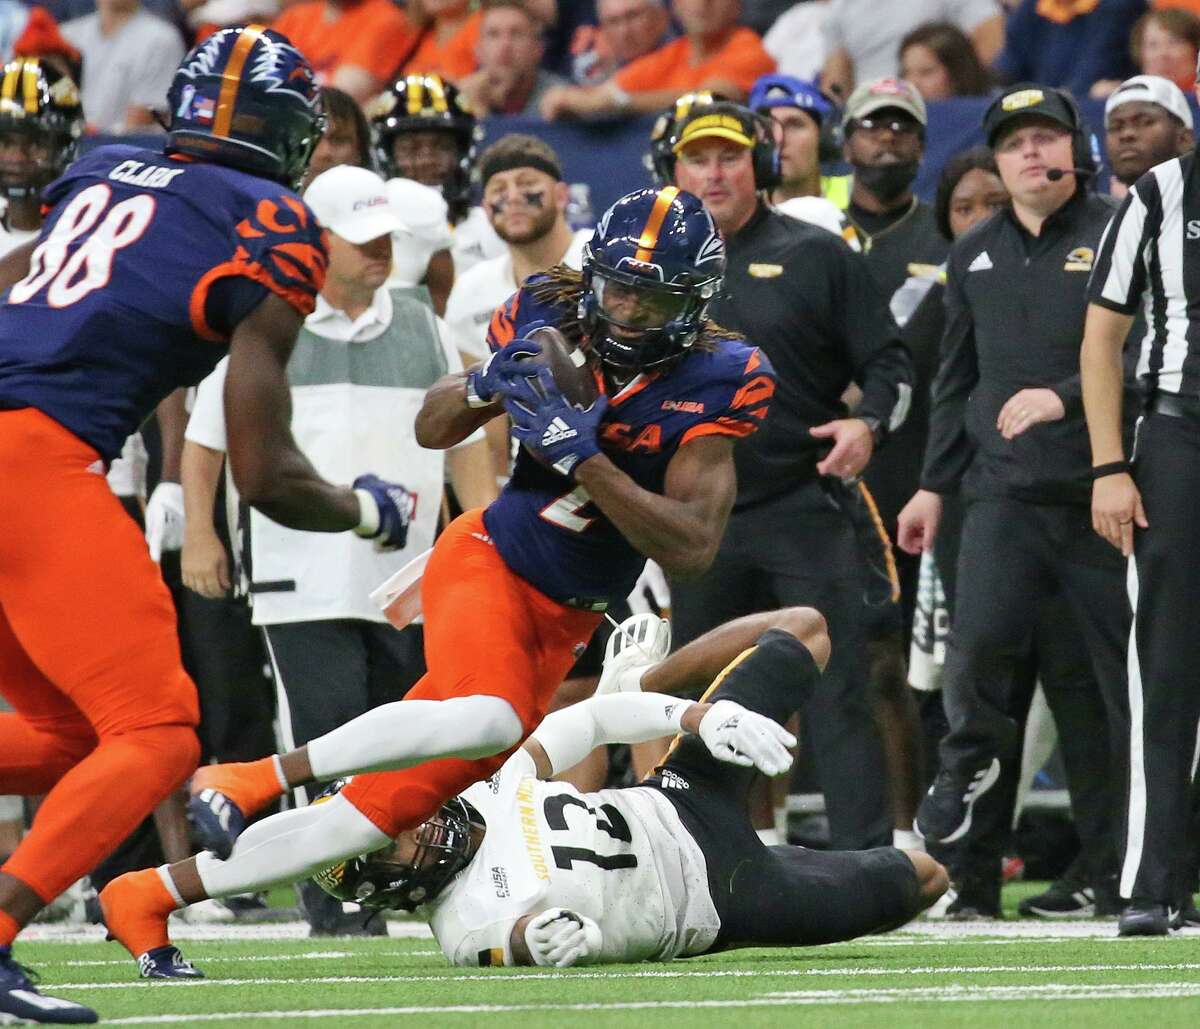 UTSA wide receiver Joshua Cephus #2 makes a reception over Southern Miss Eric Scott #12 for a touchdown in second quarter. FBC UTSA -Southern Miss on Saturday, Nov. 13, 2021 at the Alamodome